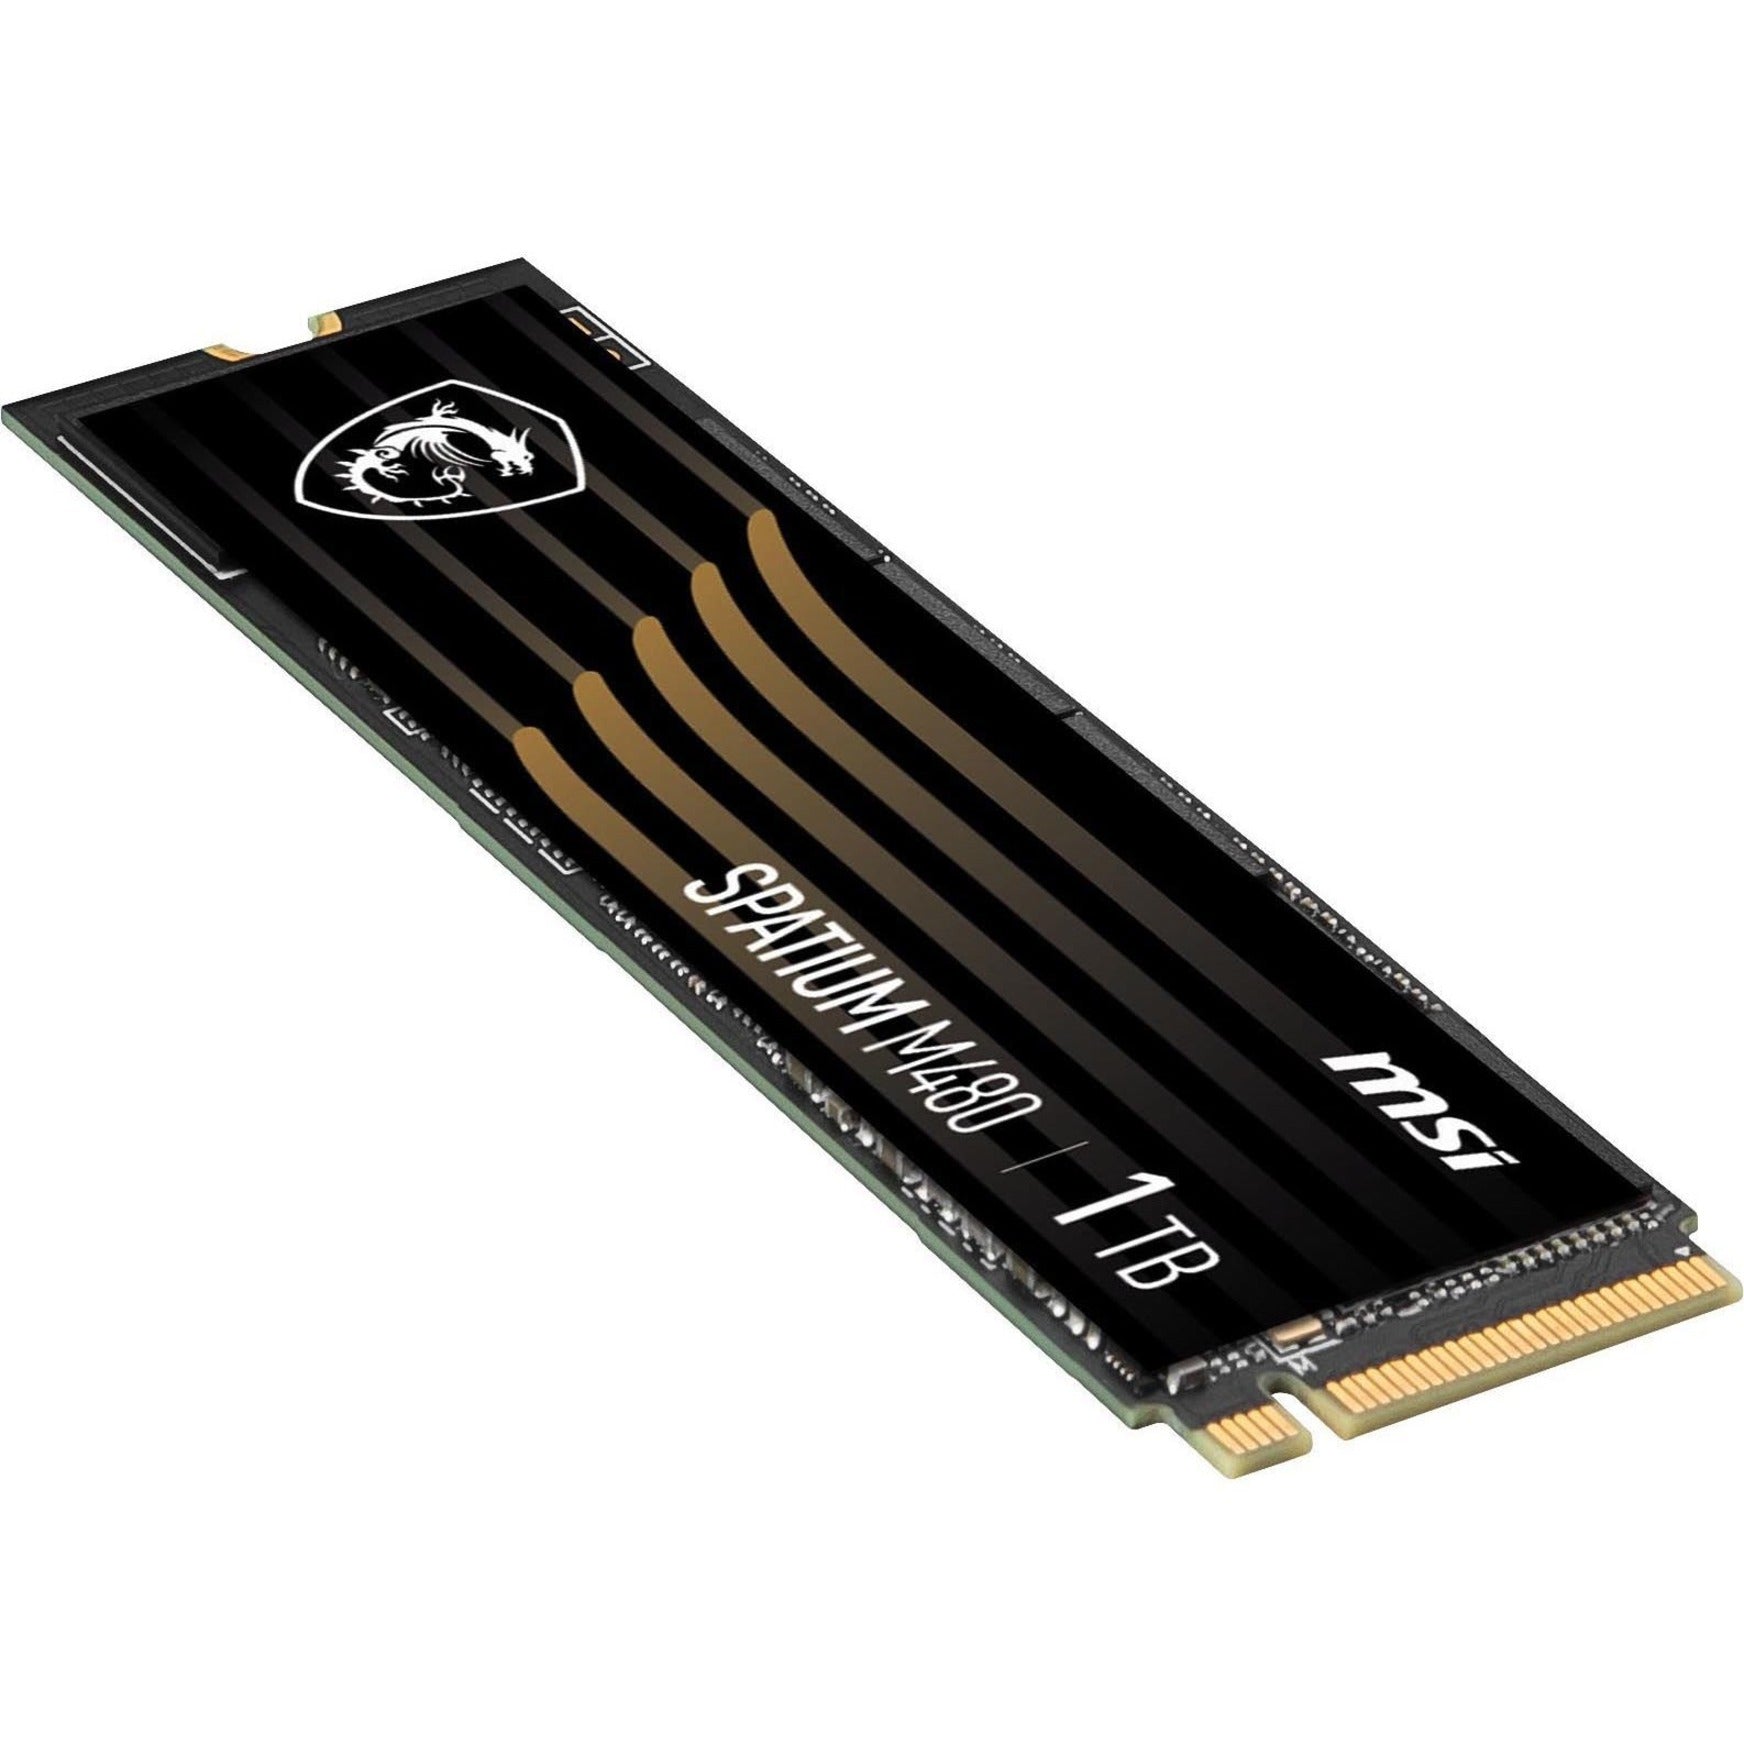 MSI SM480N1TBP SPATIUM M480 1 TB Solid State Drive, High-Speed PCIe NVMe 4.0 x4, 5-Year Warranty